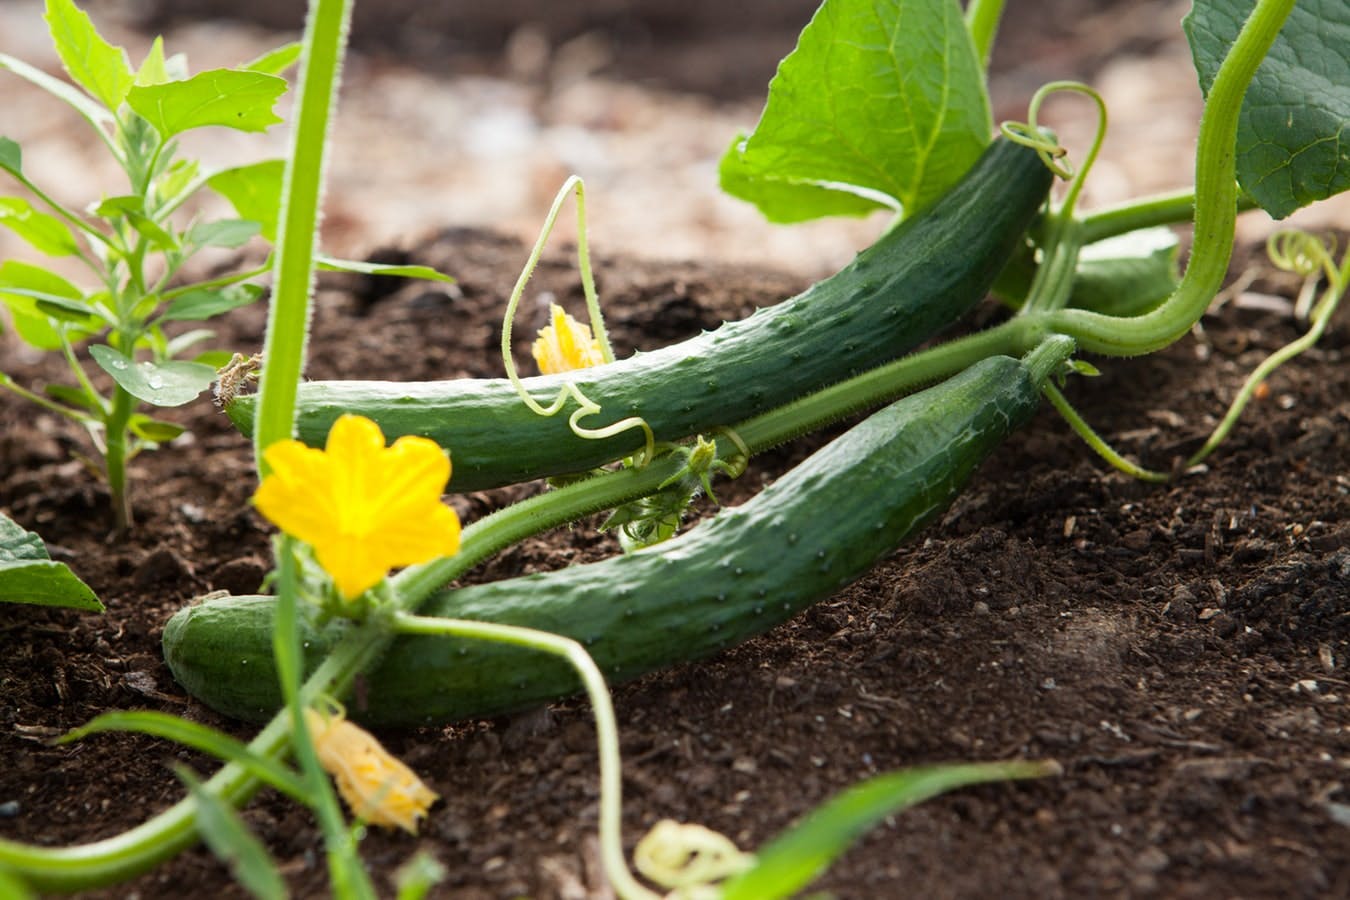 We're serious about cucumbers, and helping your business grow